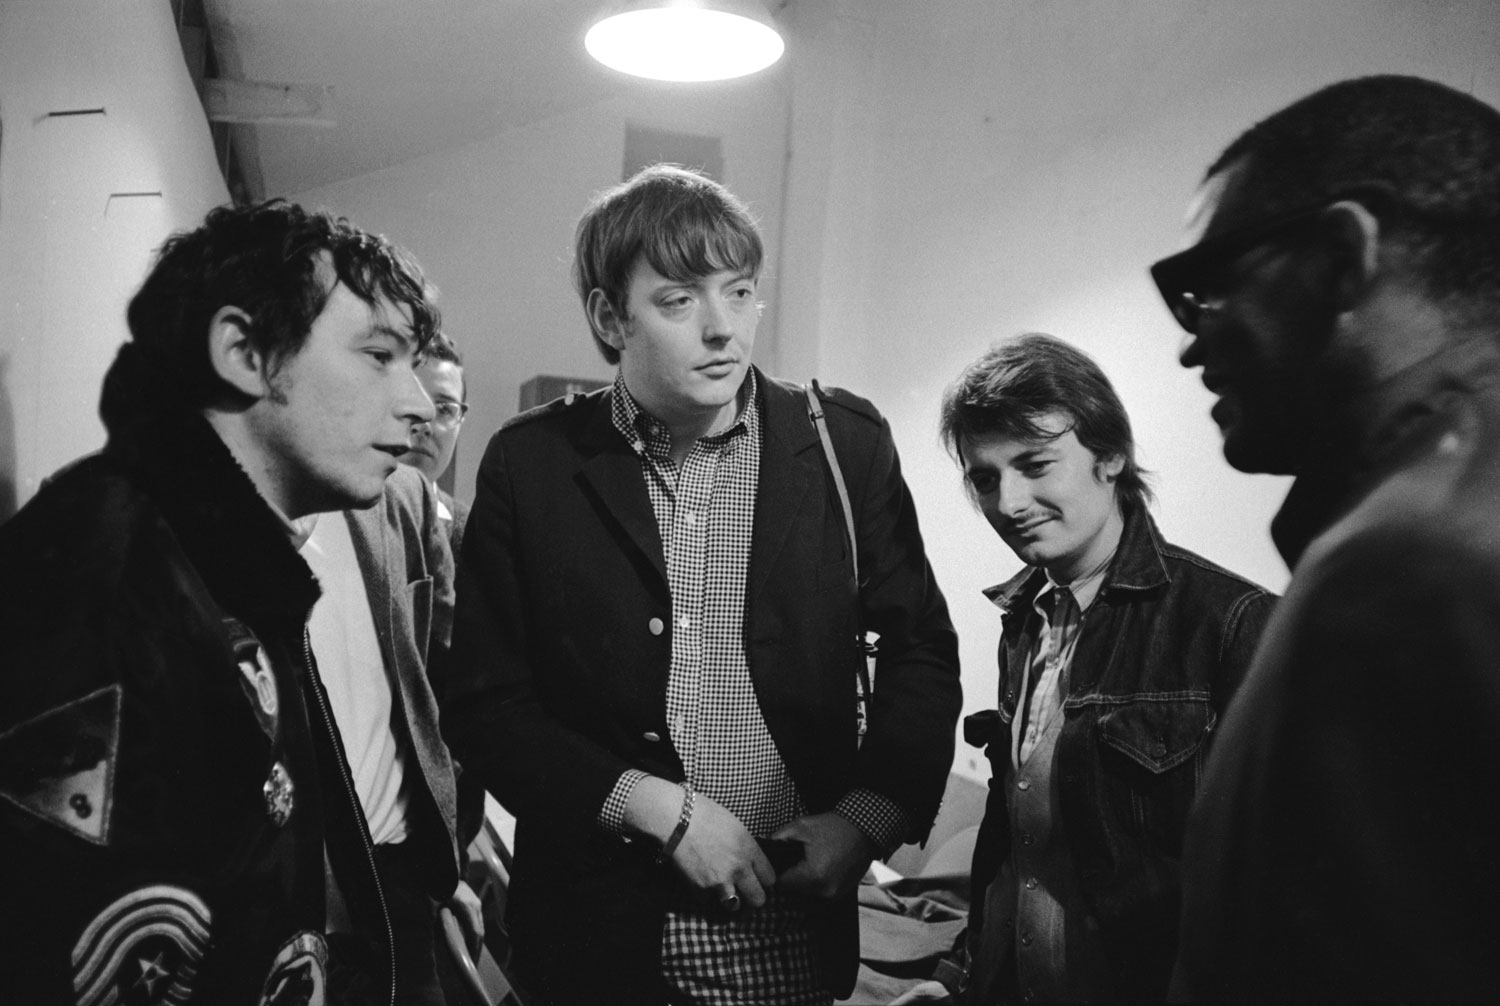 Ray Charles backstage talking with Eric Burdon and the Animals, 1966.